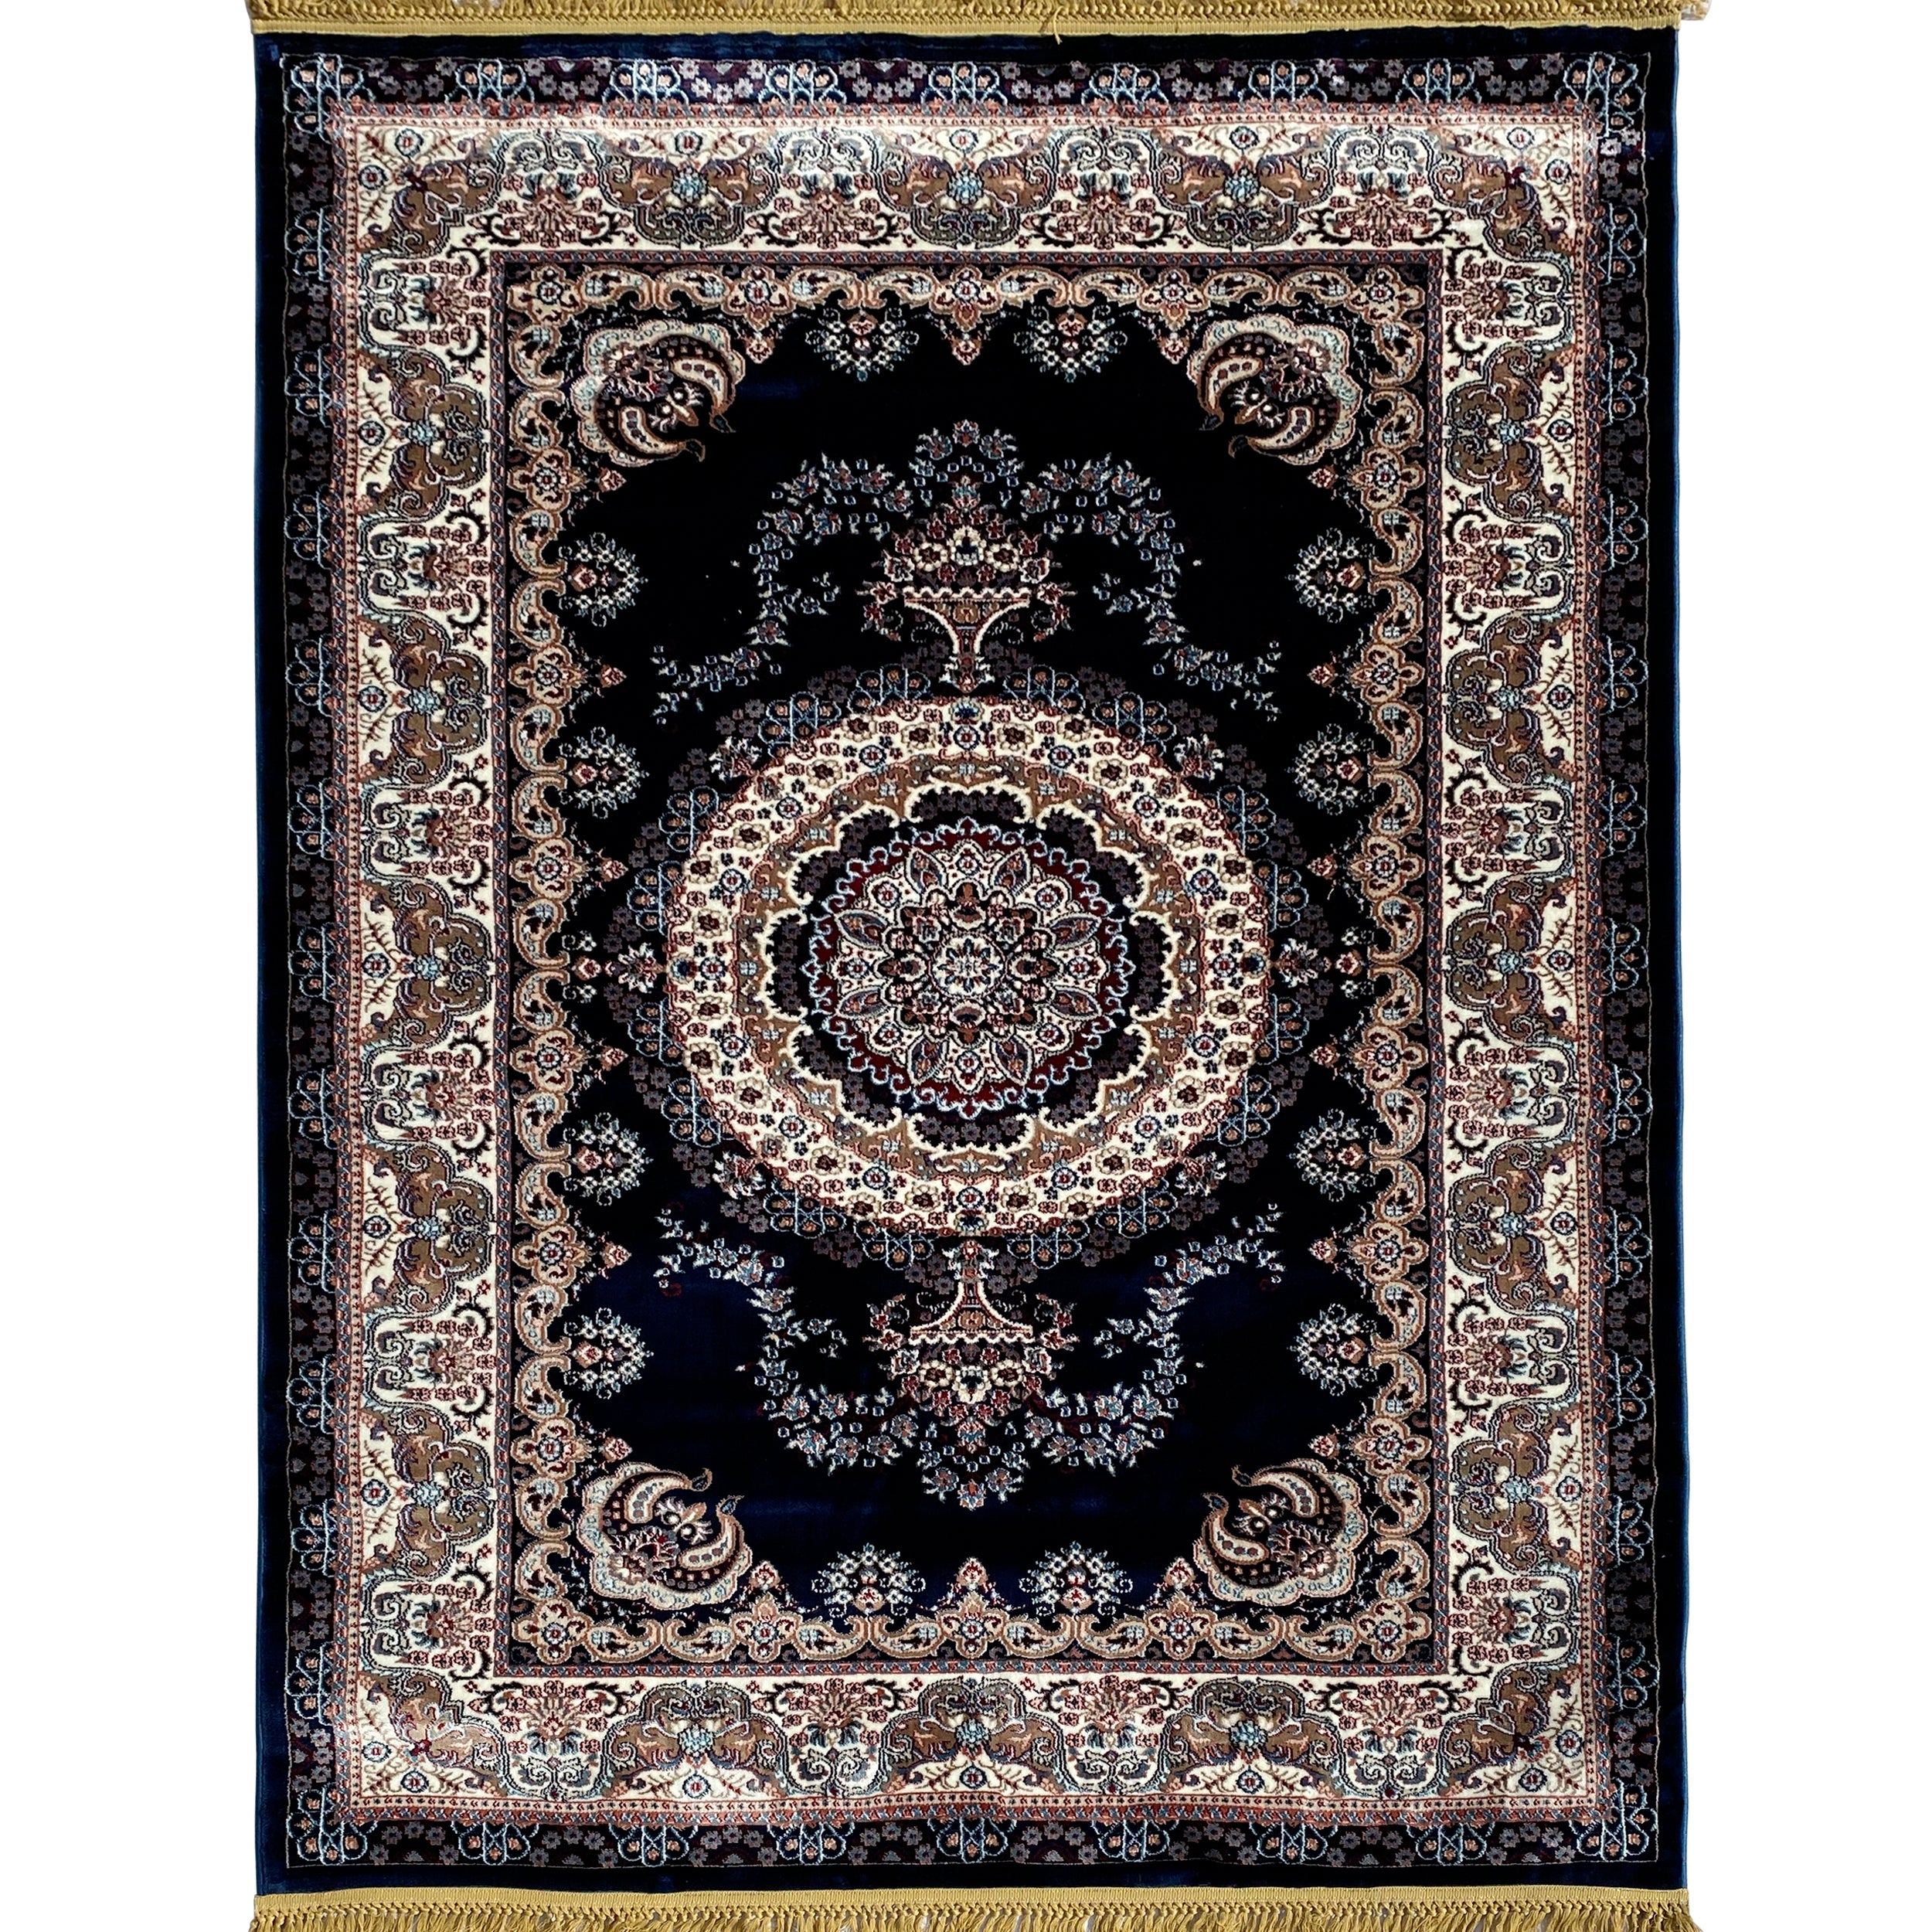 Traditional Navy Blue Oriental Area Rug, Brand: RugBerry, Collection: Kashan, Shape: Rectangular, Style: Tassel, Pattern: Vintage, Persian, Size: 5 x 7 ft, 8 x 10 ft, 9 x 12, Color: Navy Blue, Material: 100% Polyester Silk, Weave: Machine Made, Thickness: 0.5 inches, Room: Bedroom, Dining Room, Living Room, Hallway, Office, Kitchen, Bathroom, Entryway, Nursery, Kids Room